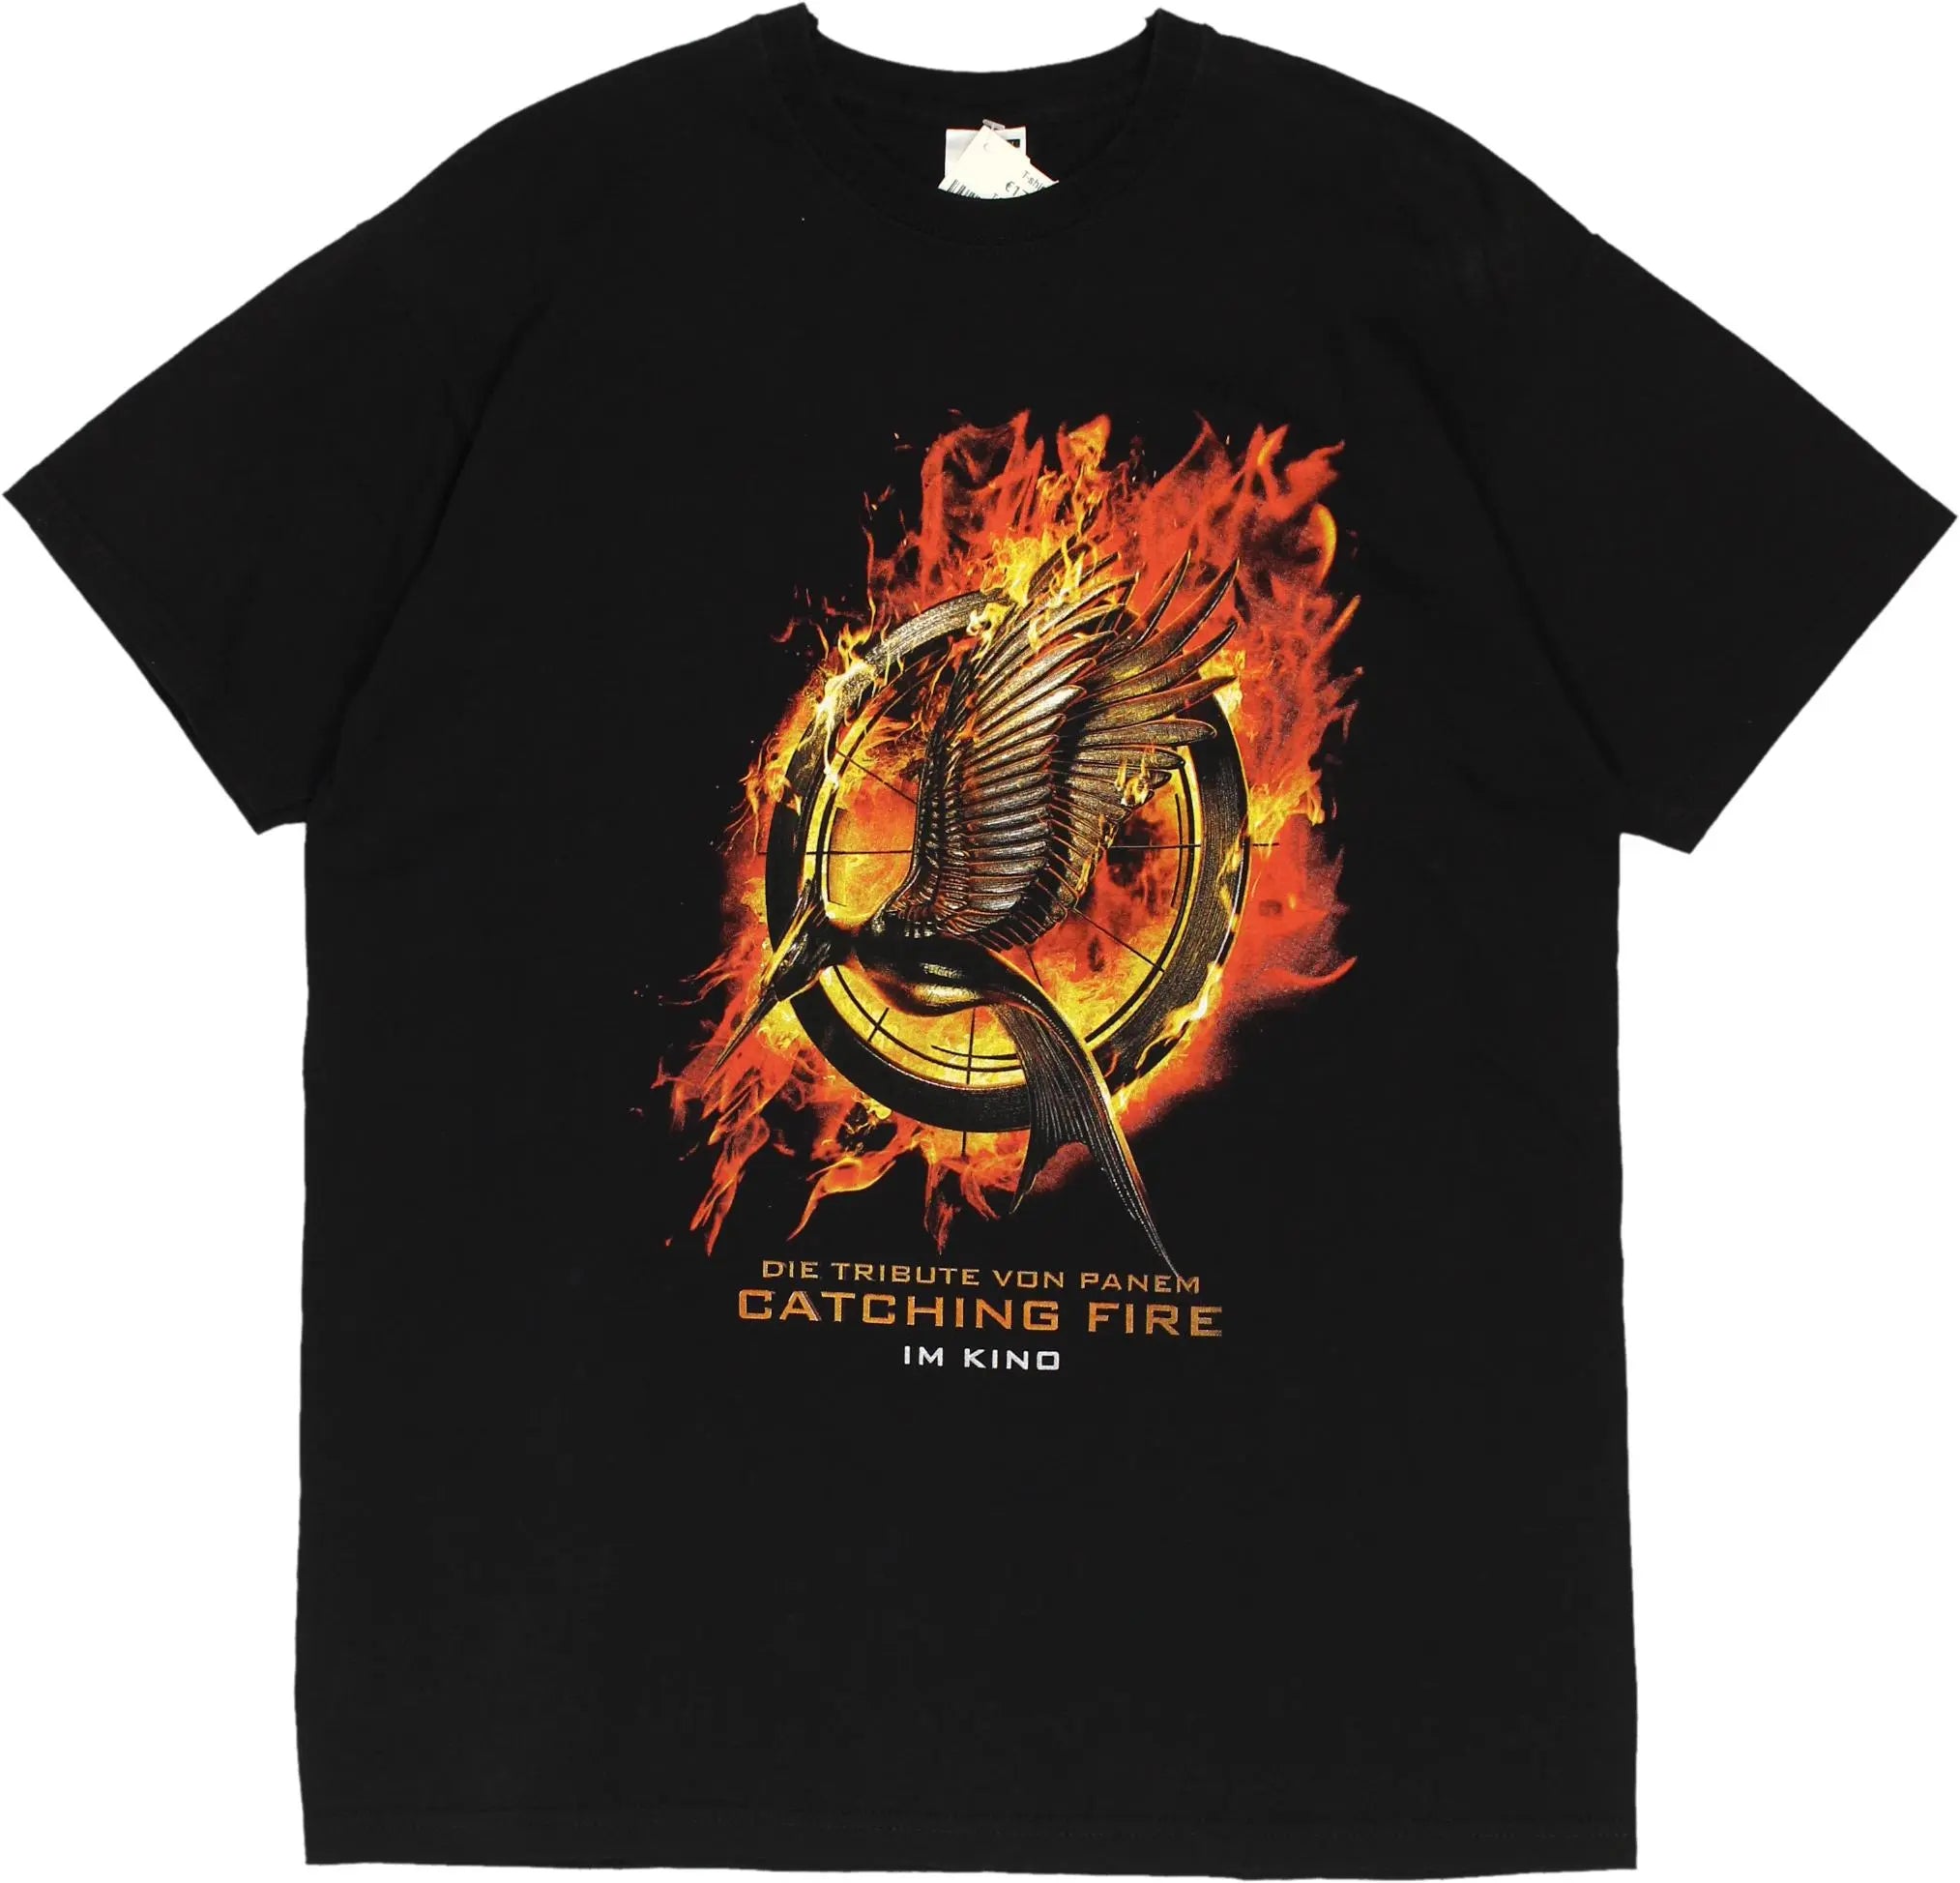 Fruit of the Loom - Catching Fire T-shirt- ThriftTale.com - Vintage and second handclothing